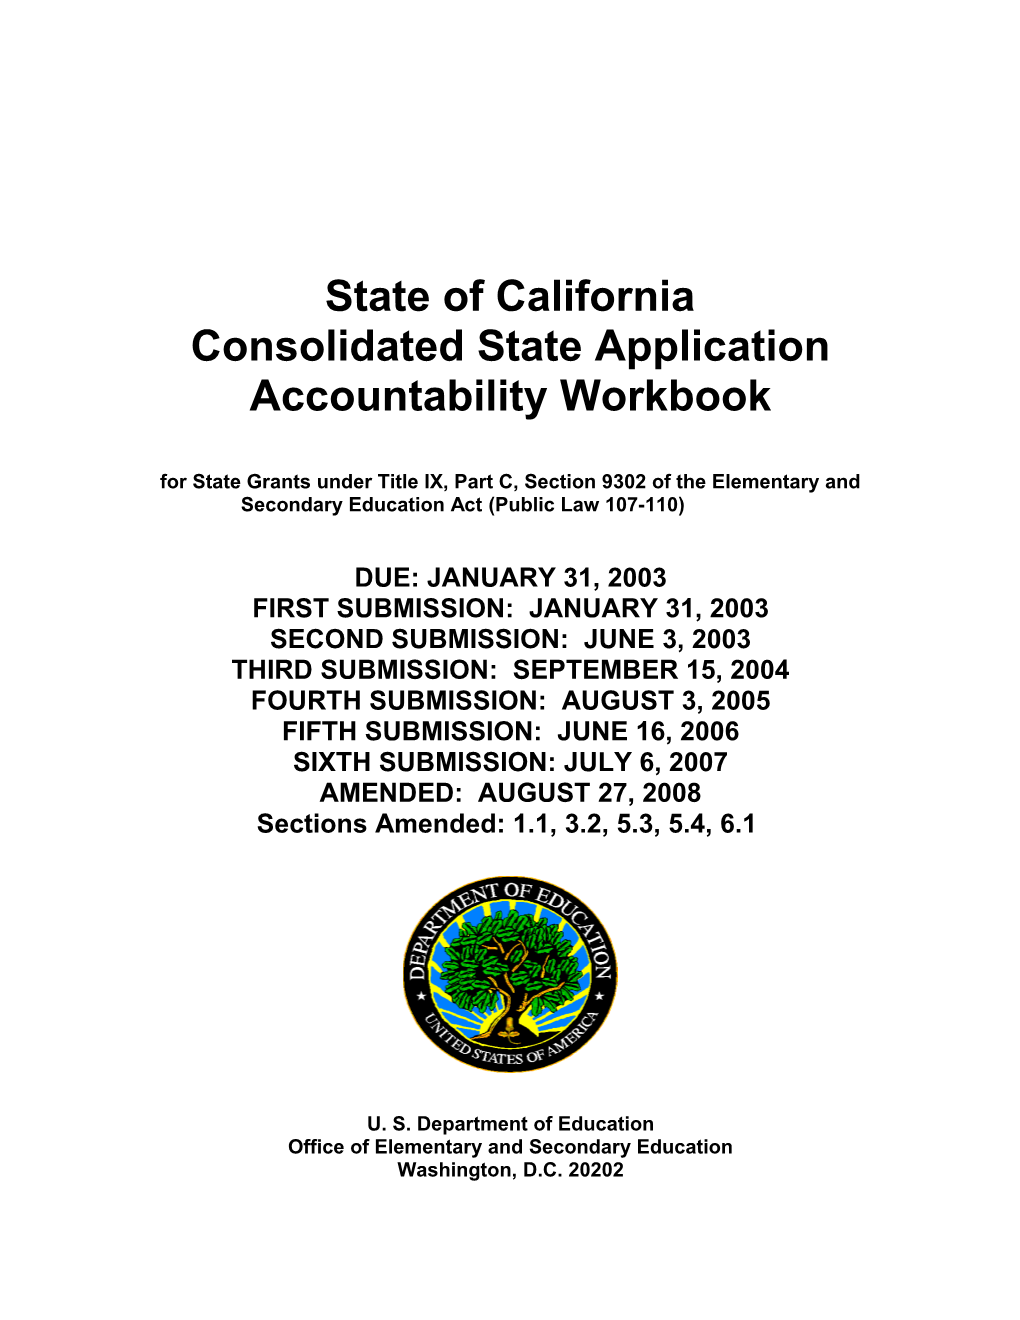 California Consolidated State Application Accountability Workbook (MS Word)